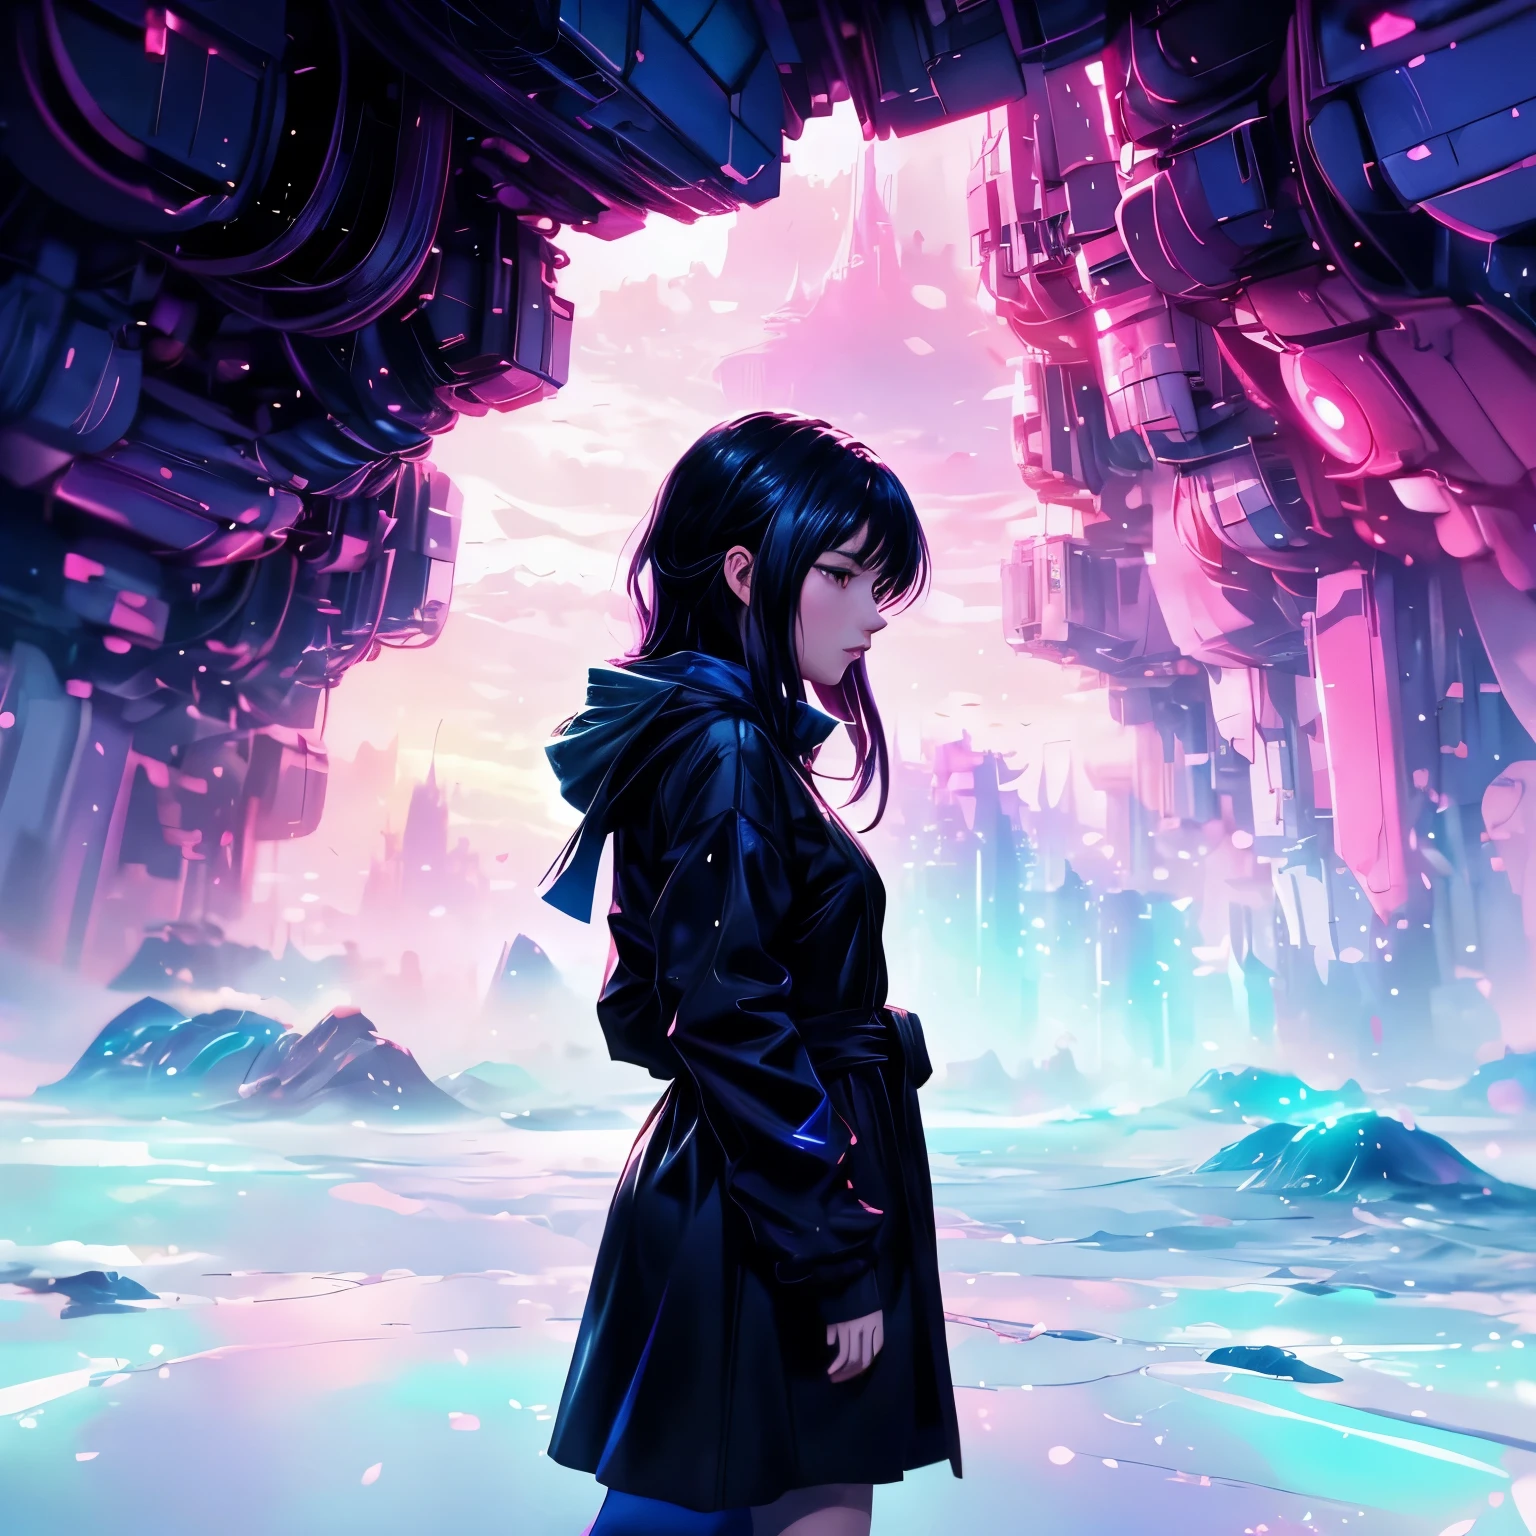 Anime girl in a black coat standing in front of a pink and blue background, Blurry dreamy illustration, Blurry dreamy illustration, Inspired by Alena Aenami, makoto shinkai cyril rolando, Just a joke, Inspired by Kilian Eng, style of alena aenami, Art by Alena Aenami, Dreamy Cyberpunk Girl, Reusch |